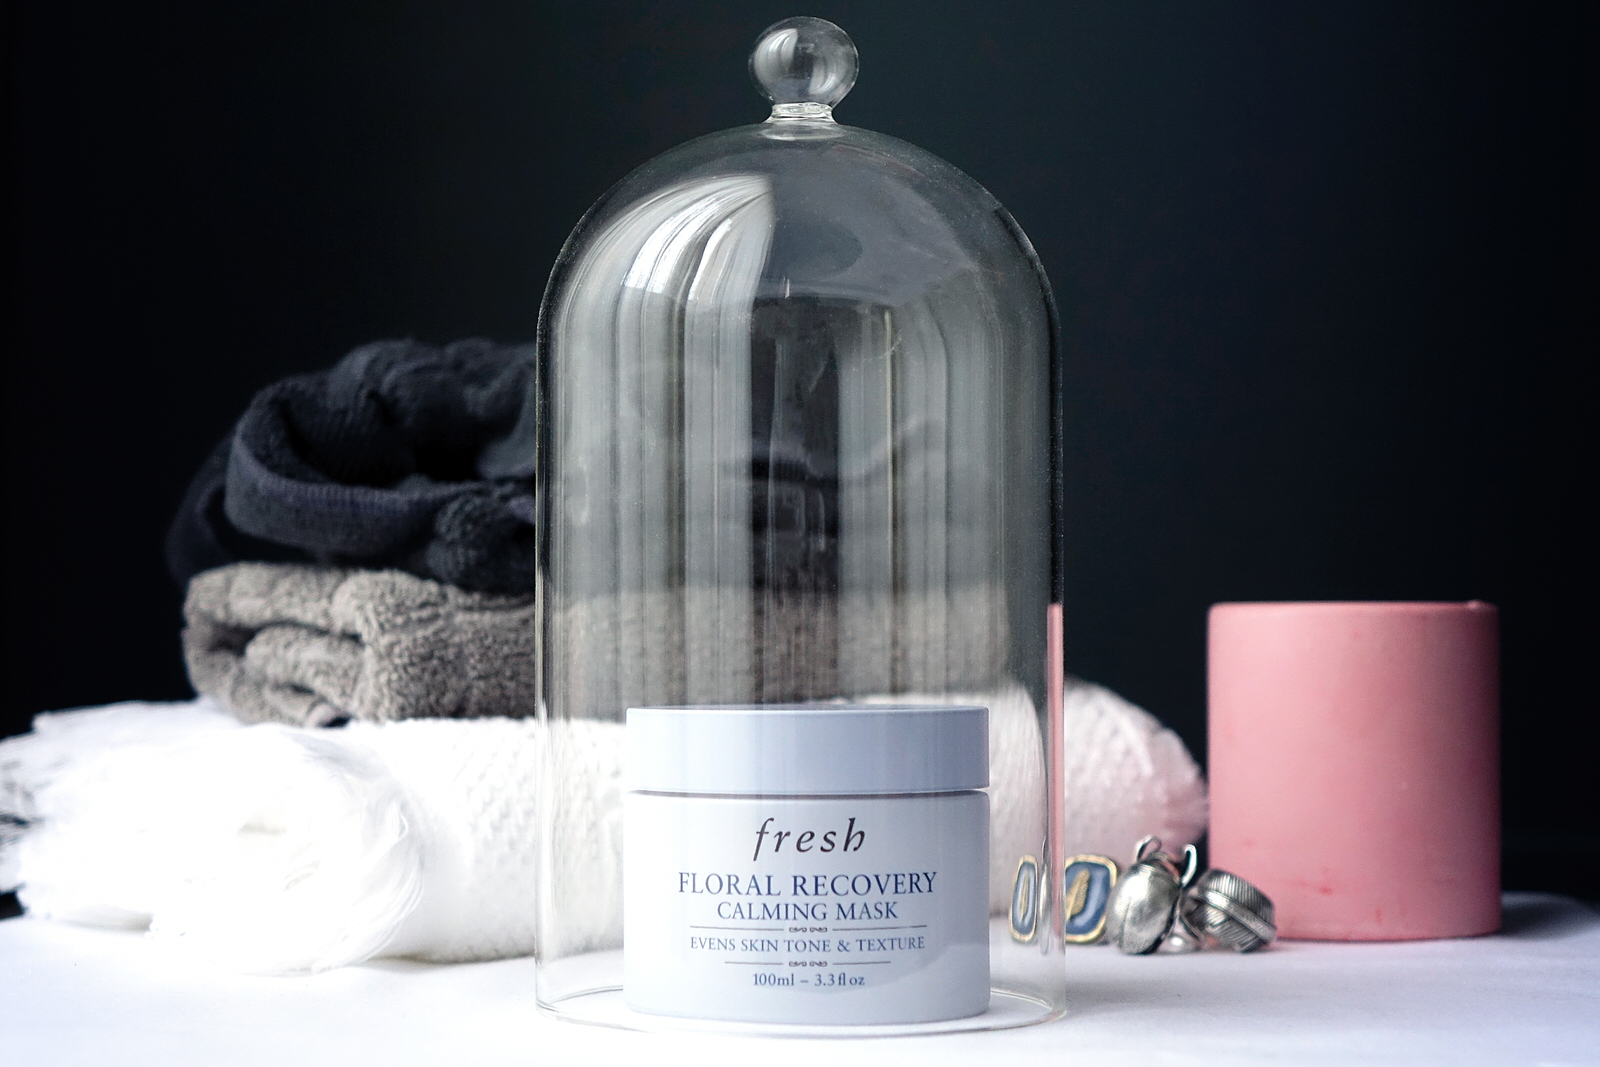 Floral Recovery calming mask de Fresh